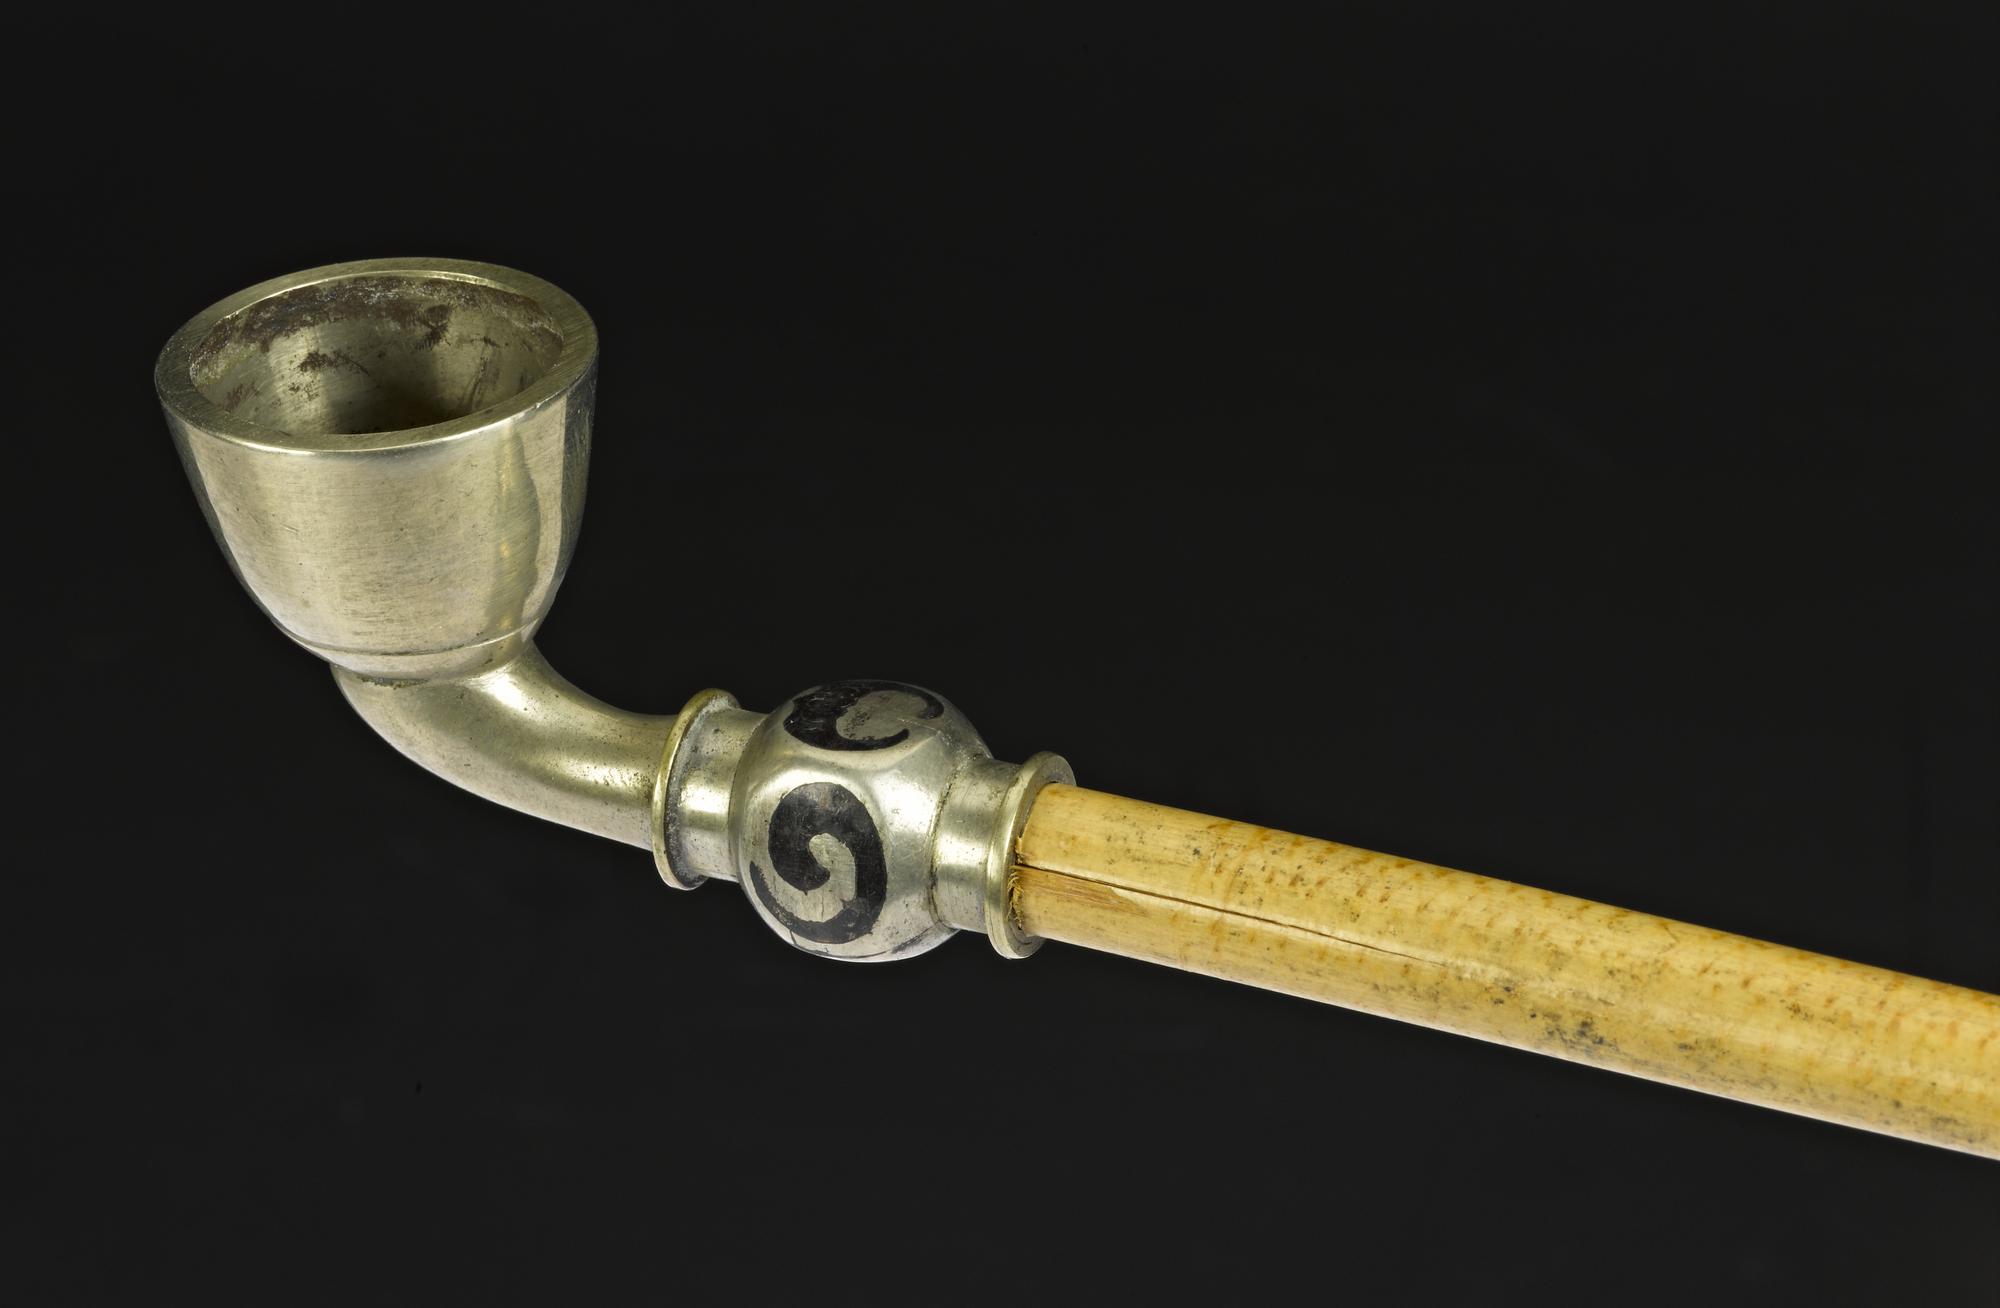 Tobacco-pipe with a metal bowl and mouthpiece, and a cane stem: Korea.